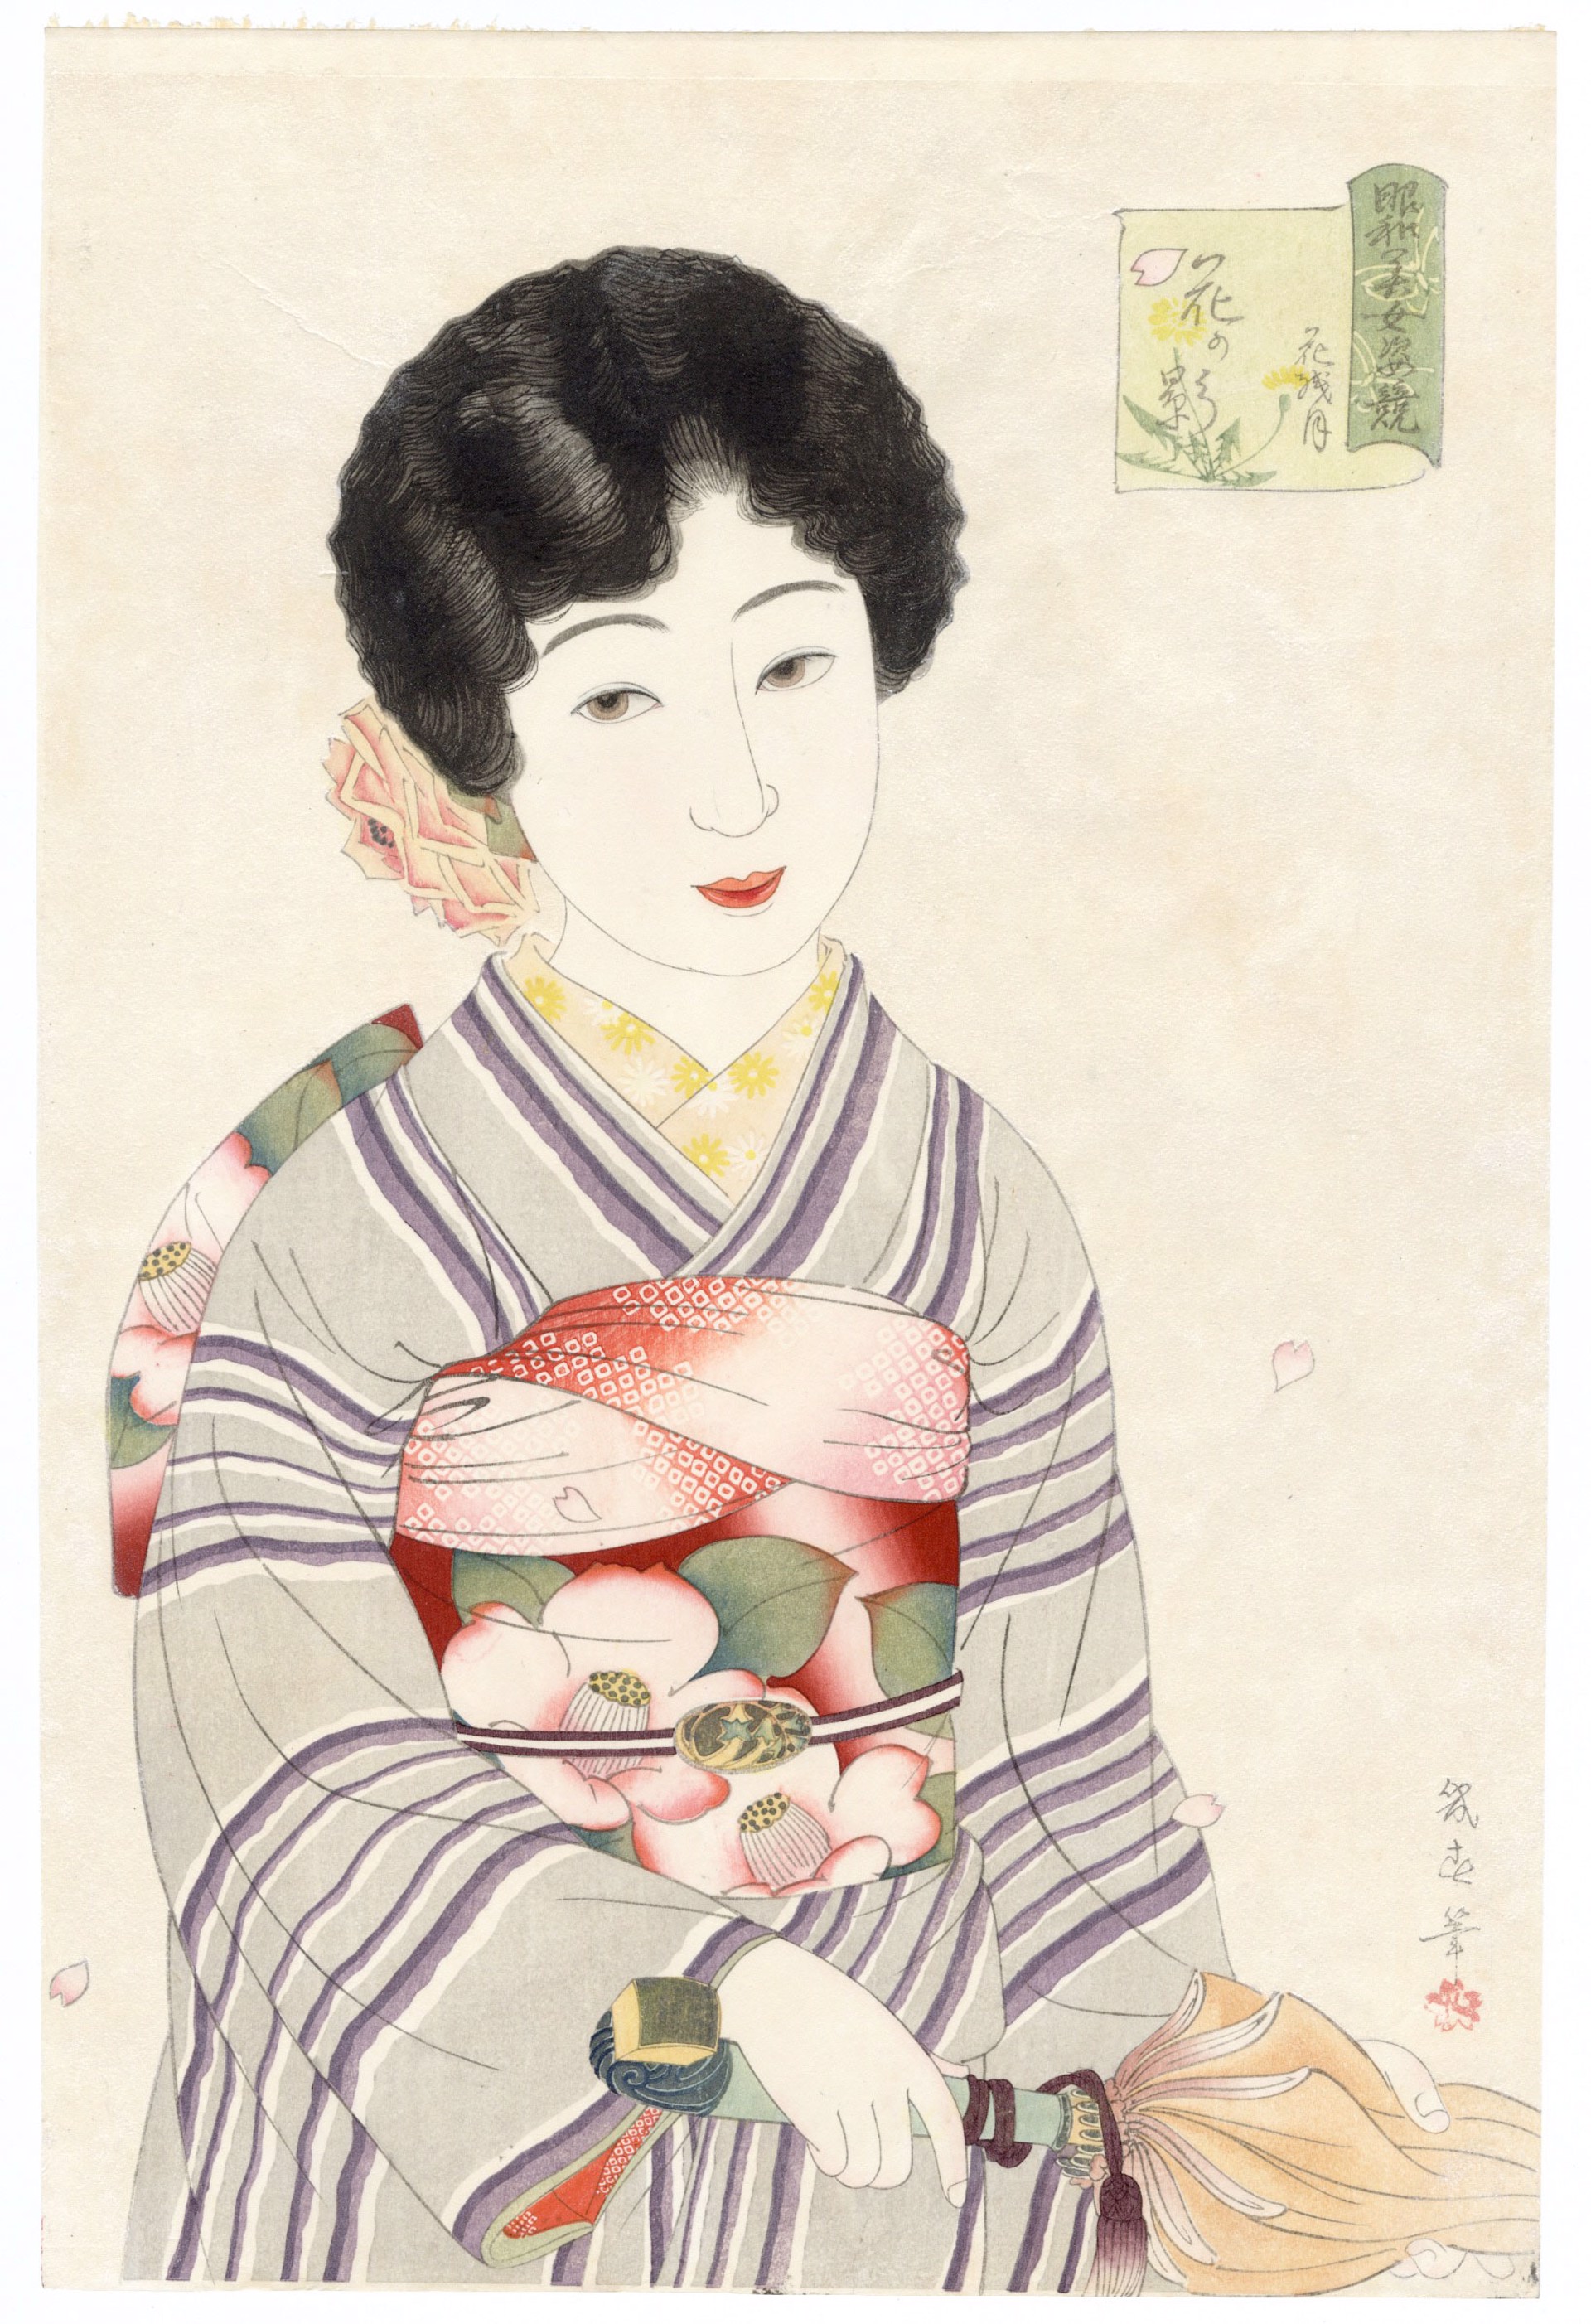 April - Shadows of Cherry Blossoms Competing Beauties in the Showa Era. by Watanabe Ikuharu